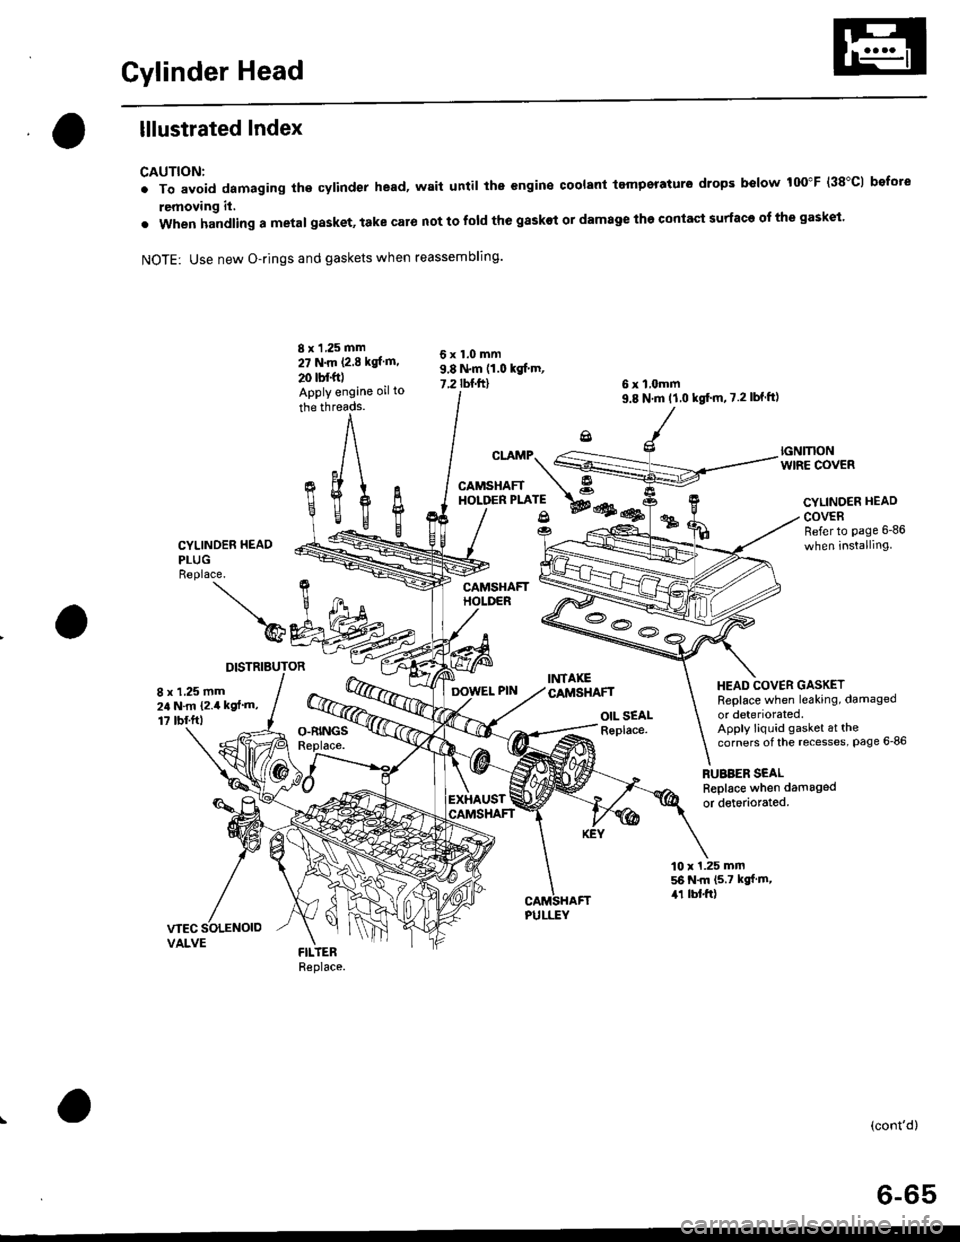 HONDA CIVIC 1996 6.G Owners Guide Cylinder Head
lllustrated Index
CAUTION:
. To avoid damaging the cylinder head, wait until the engine coolant tempsraturo drops below 100"F (38"C1 bofote
removing it,
. when handling a metal gasket, t